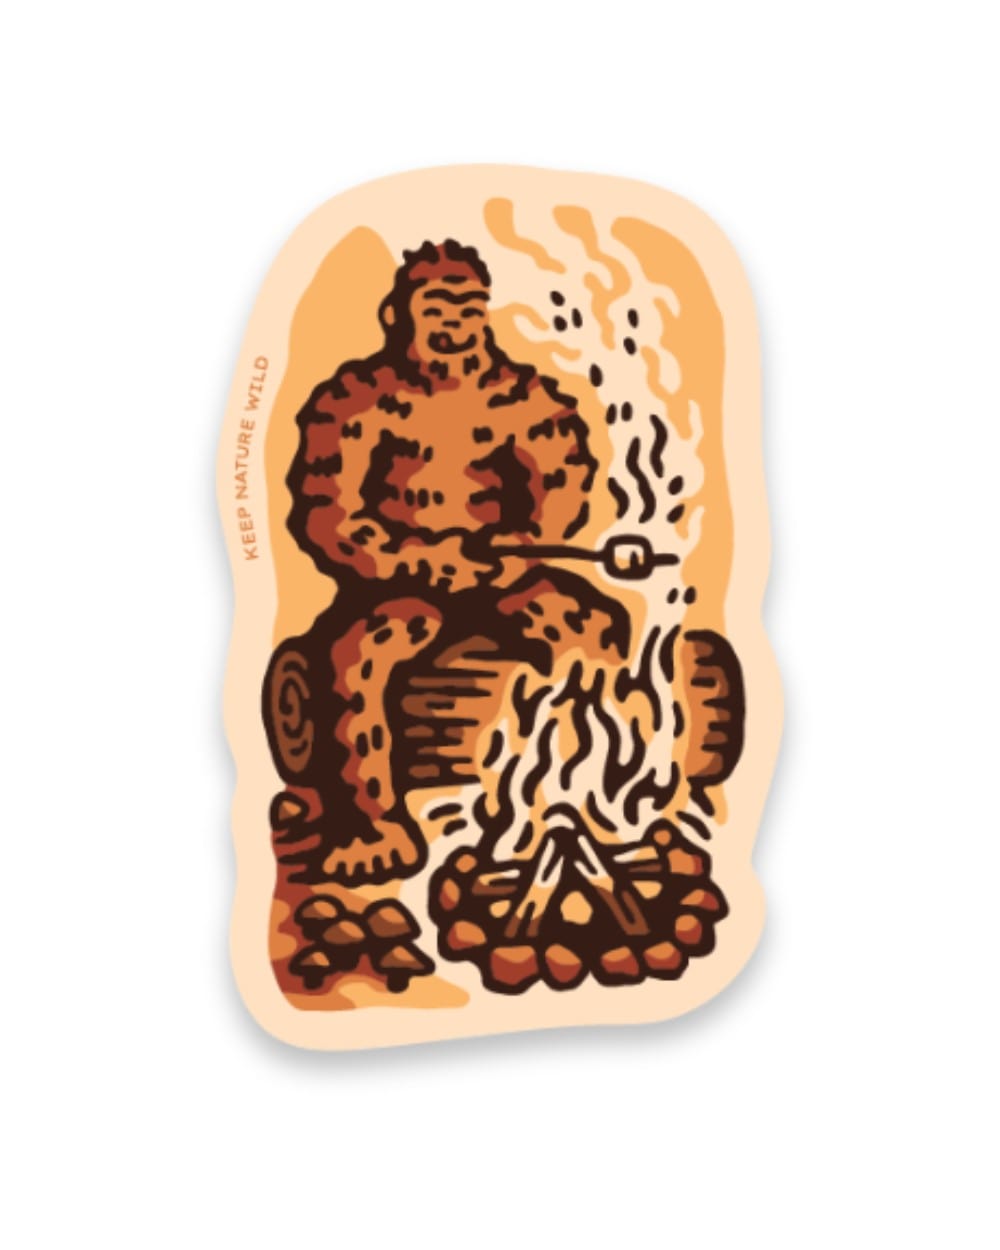 Keep Nature Wild Seasons of Squatch 4-Pack | Stickers